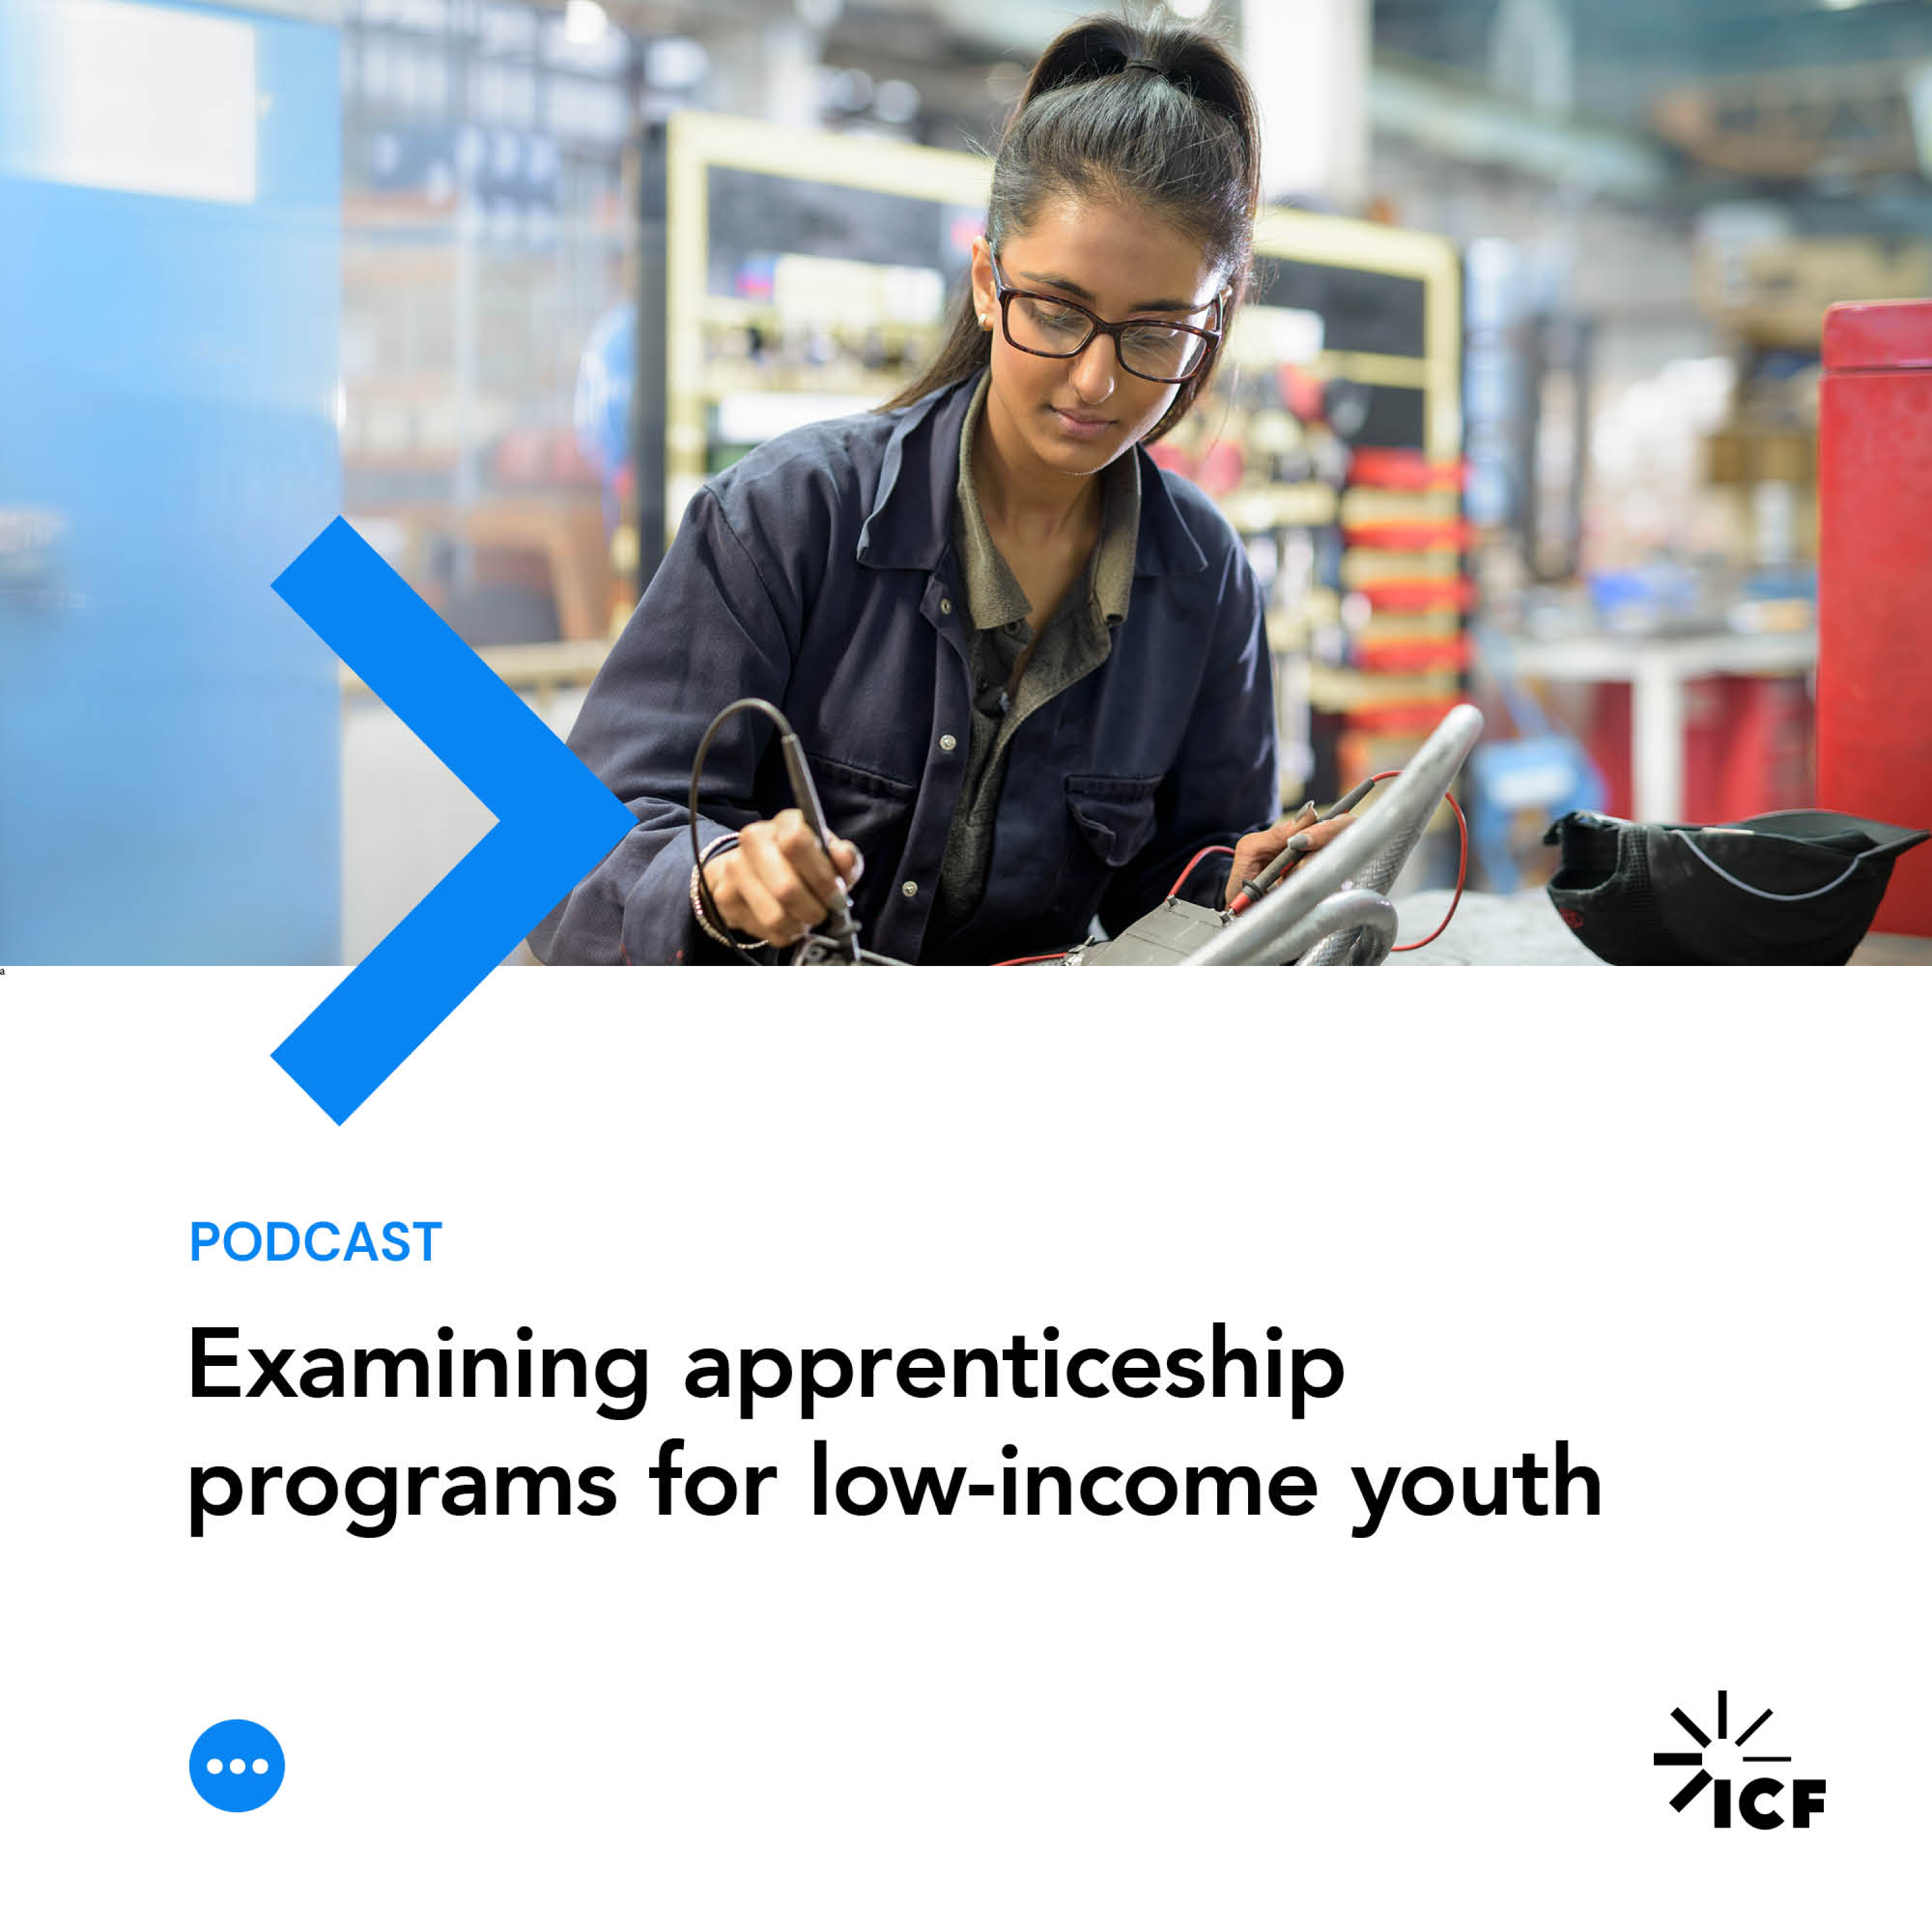 Examining apprenticeship programs for low-income youth